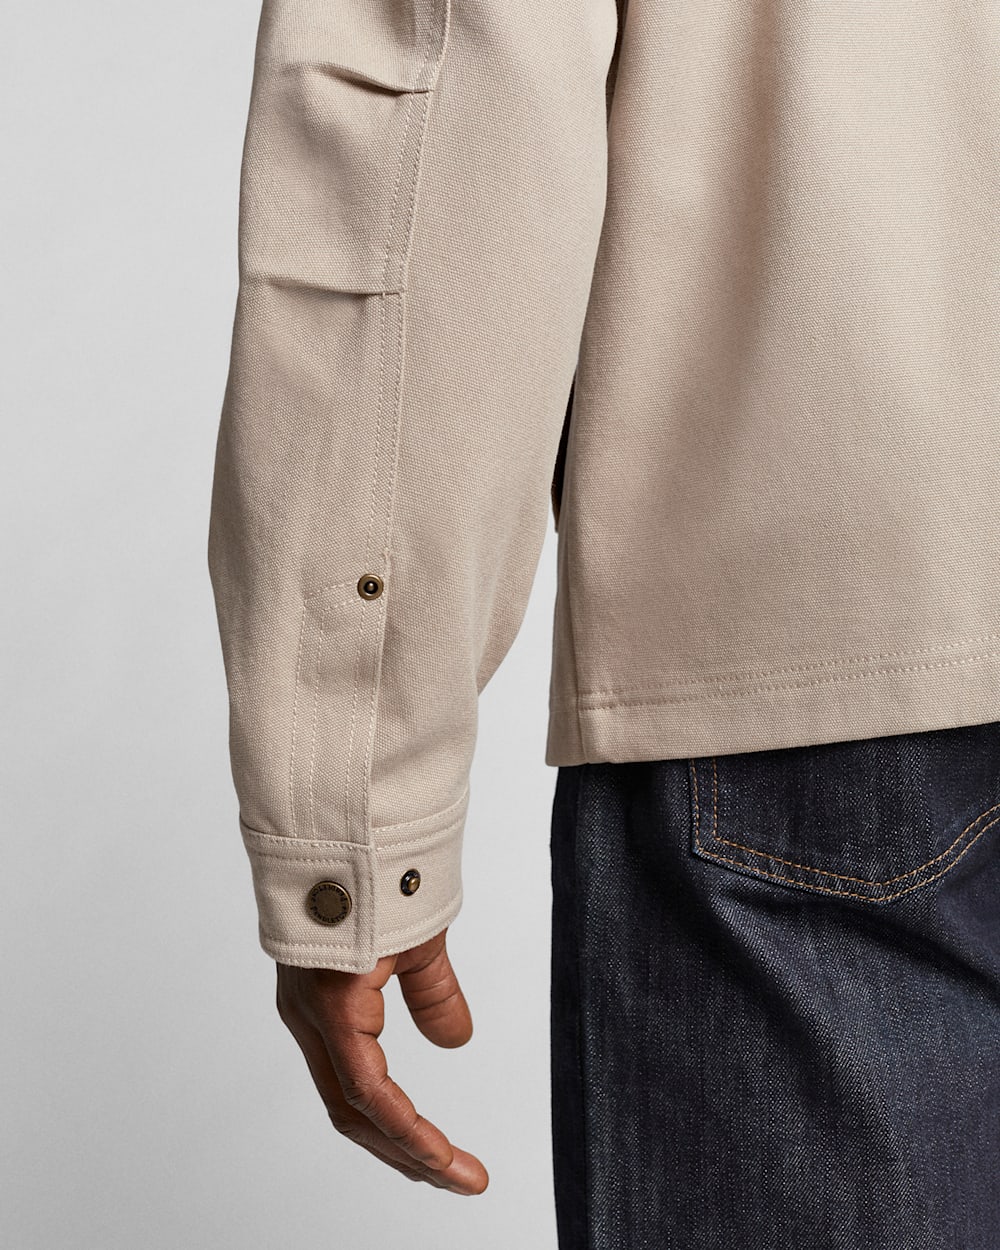 ALTERNATE VIEW OF MEN'S ADAMS CANVAS MECHANIC'S JACKET IN TAUPE image number 6